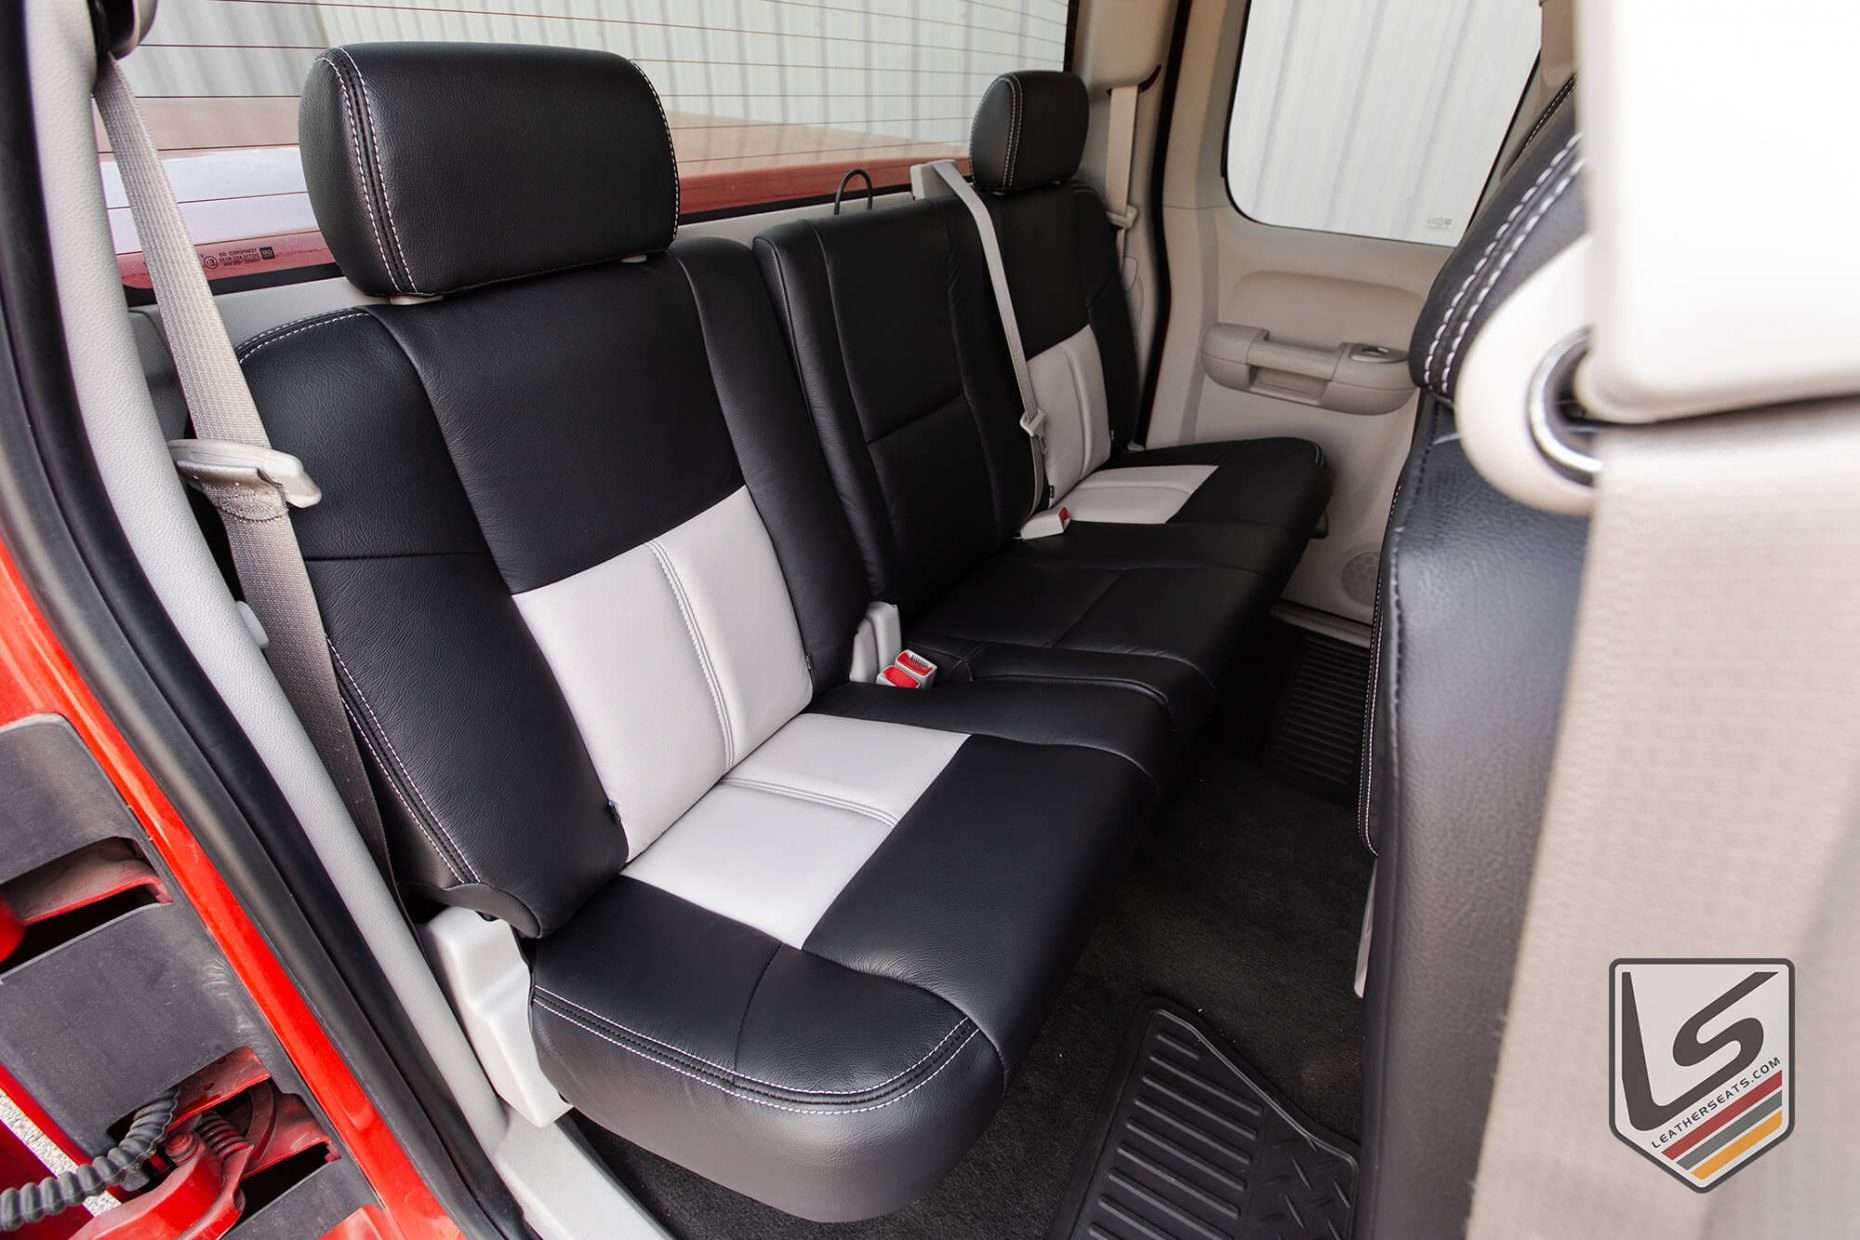 2007-2013 Chevrolet silverado with custom leatherseats.com interior - Rear seat from passenger side